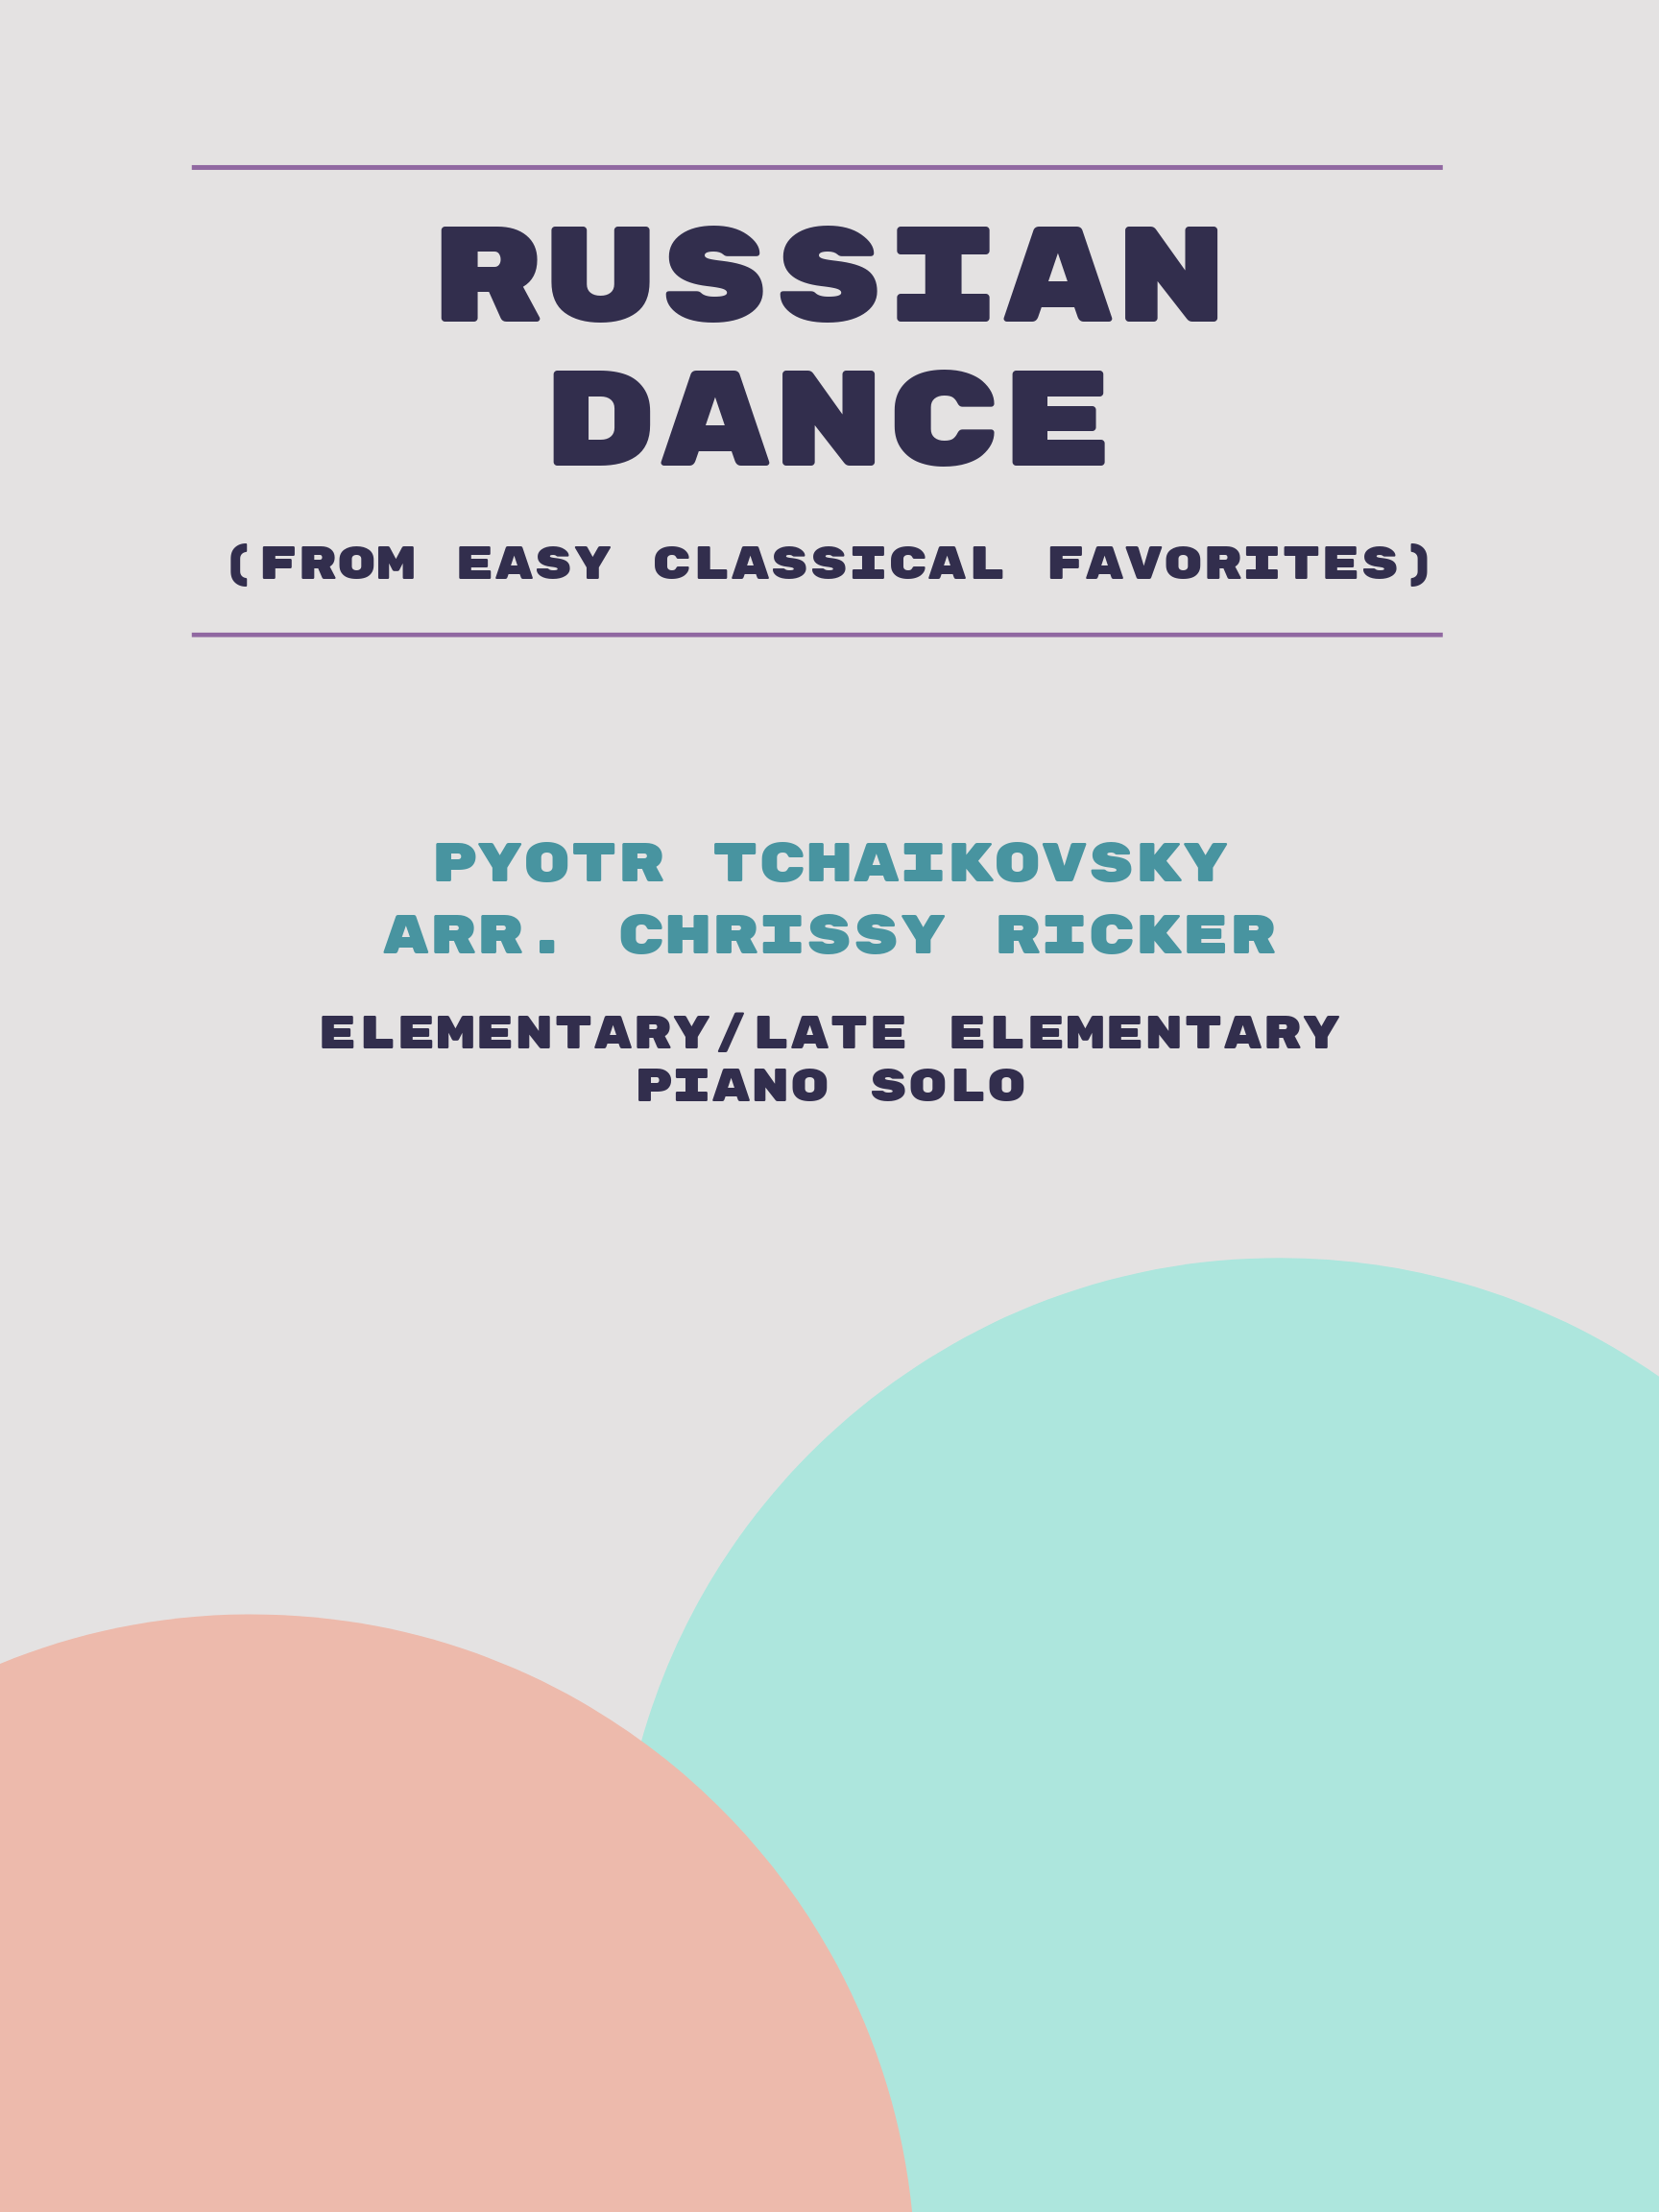 Russian Dance Sample Page